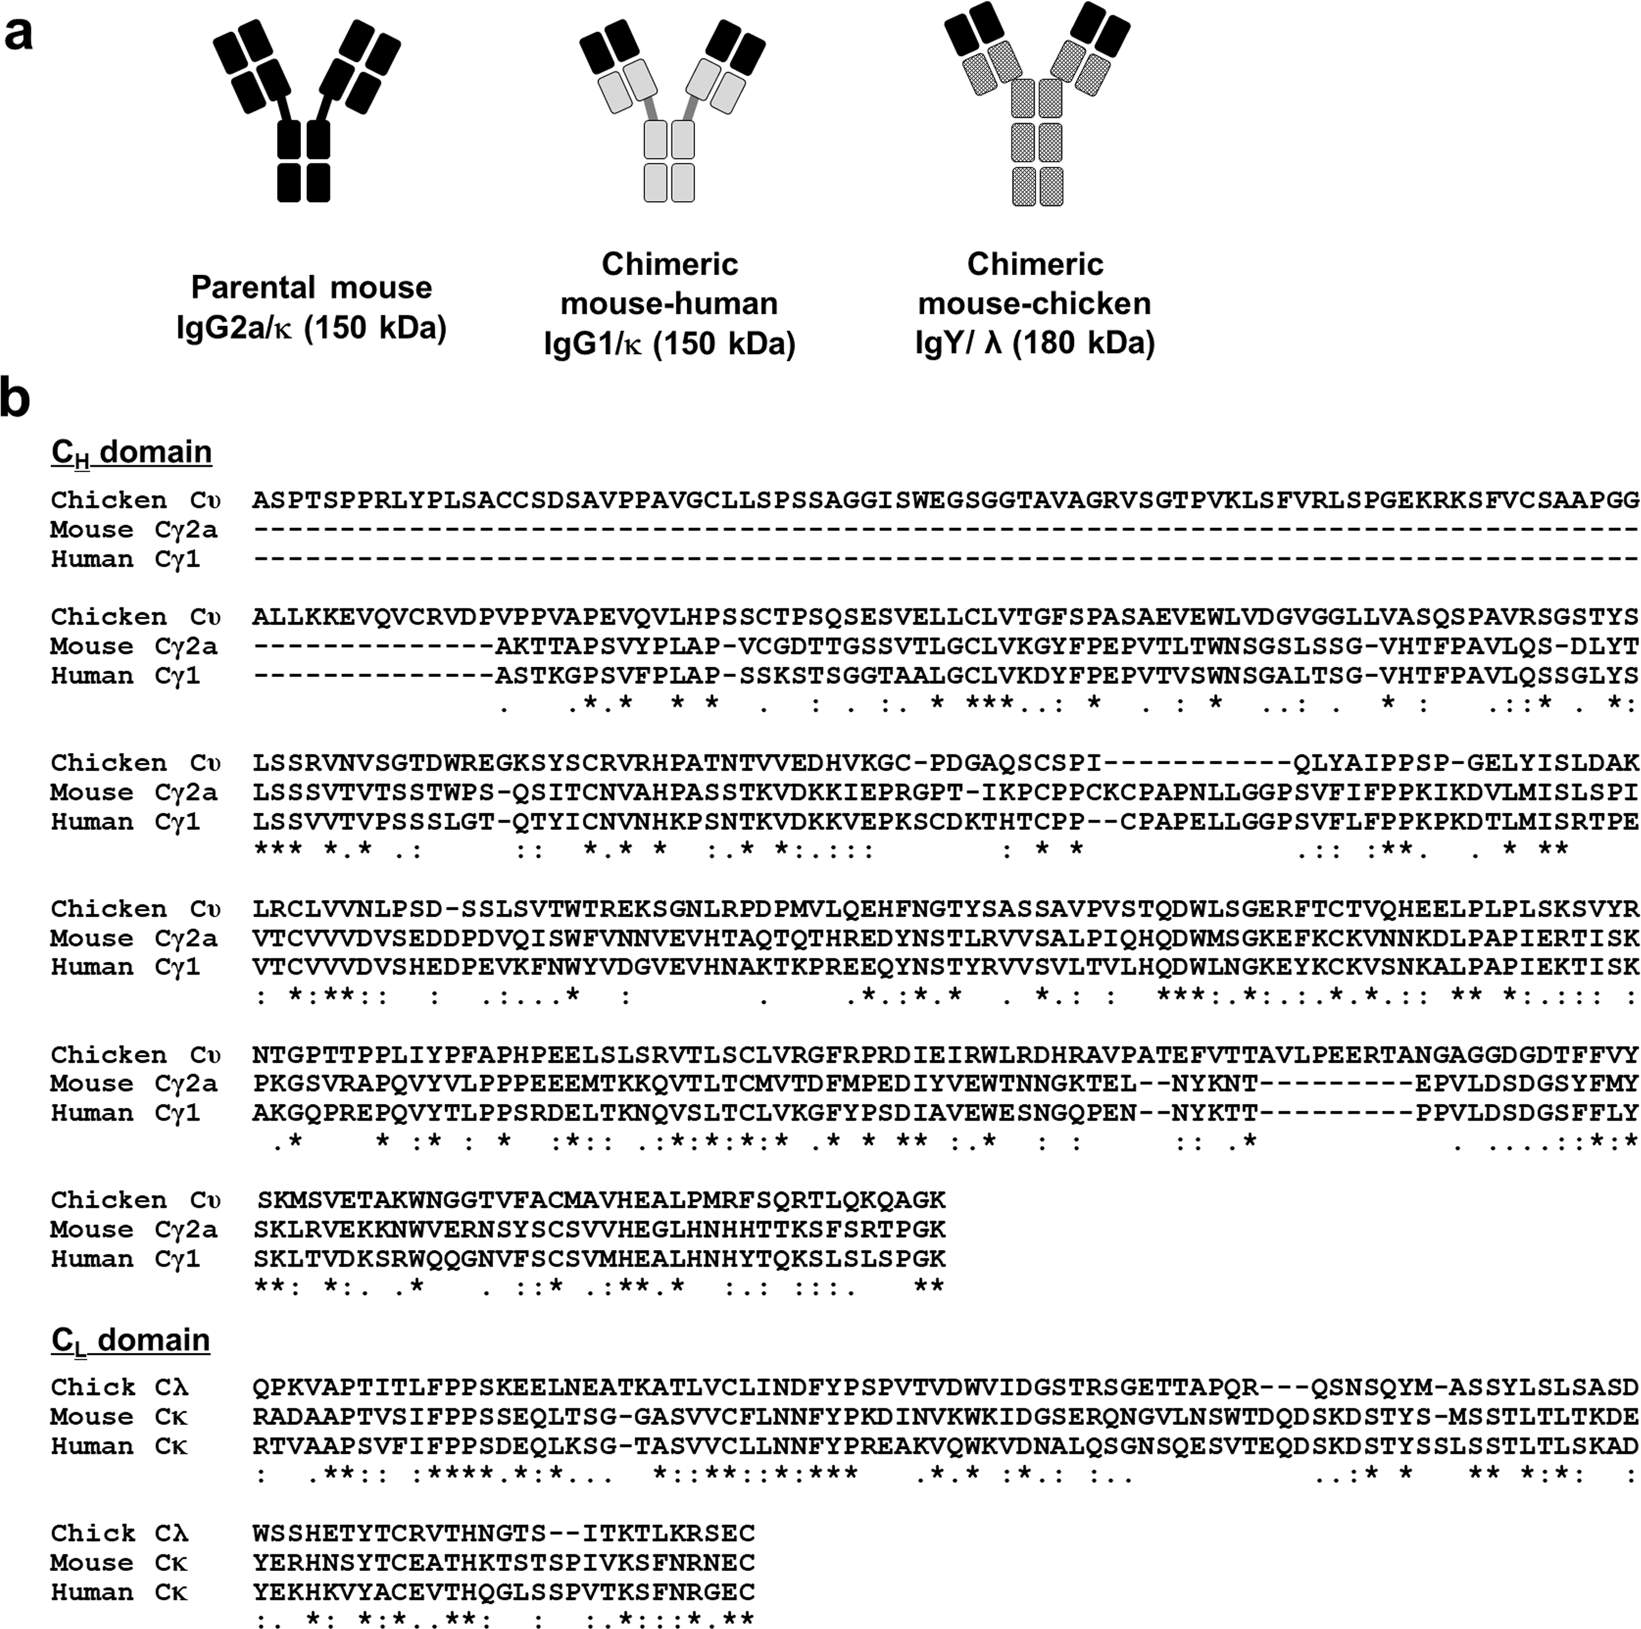 Antigen-binding affinity and thermostability of chimeric mouse-chicken IgY  and mouse-human IgG antibodies with identical variable domains | Scientific  Reports